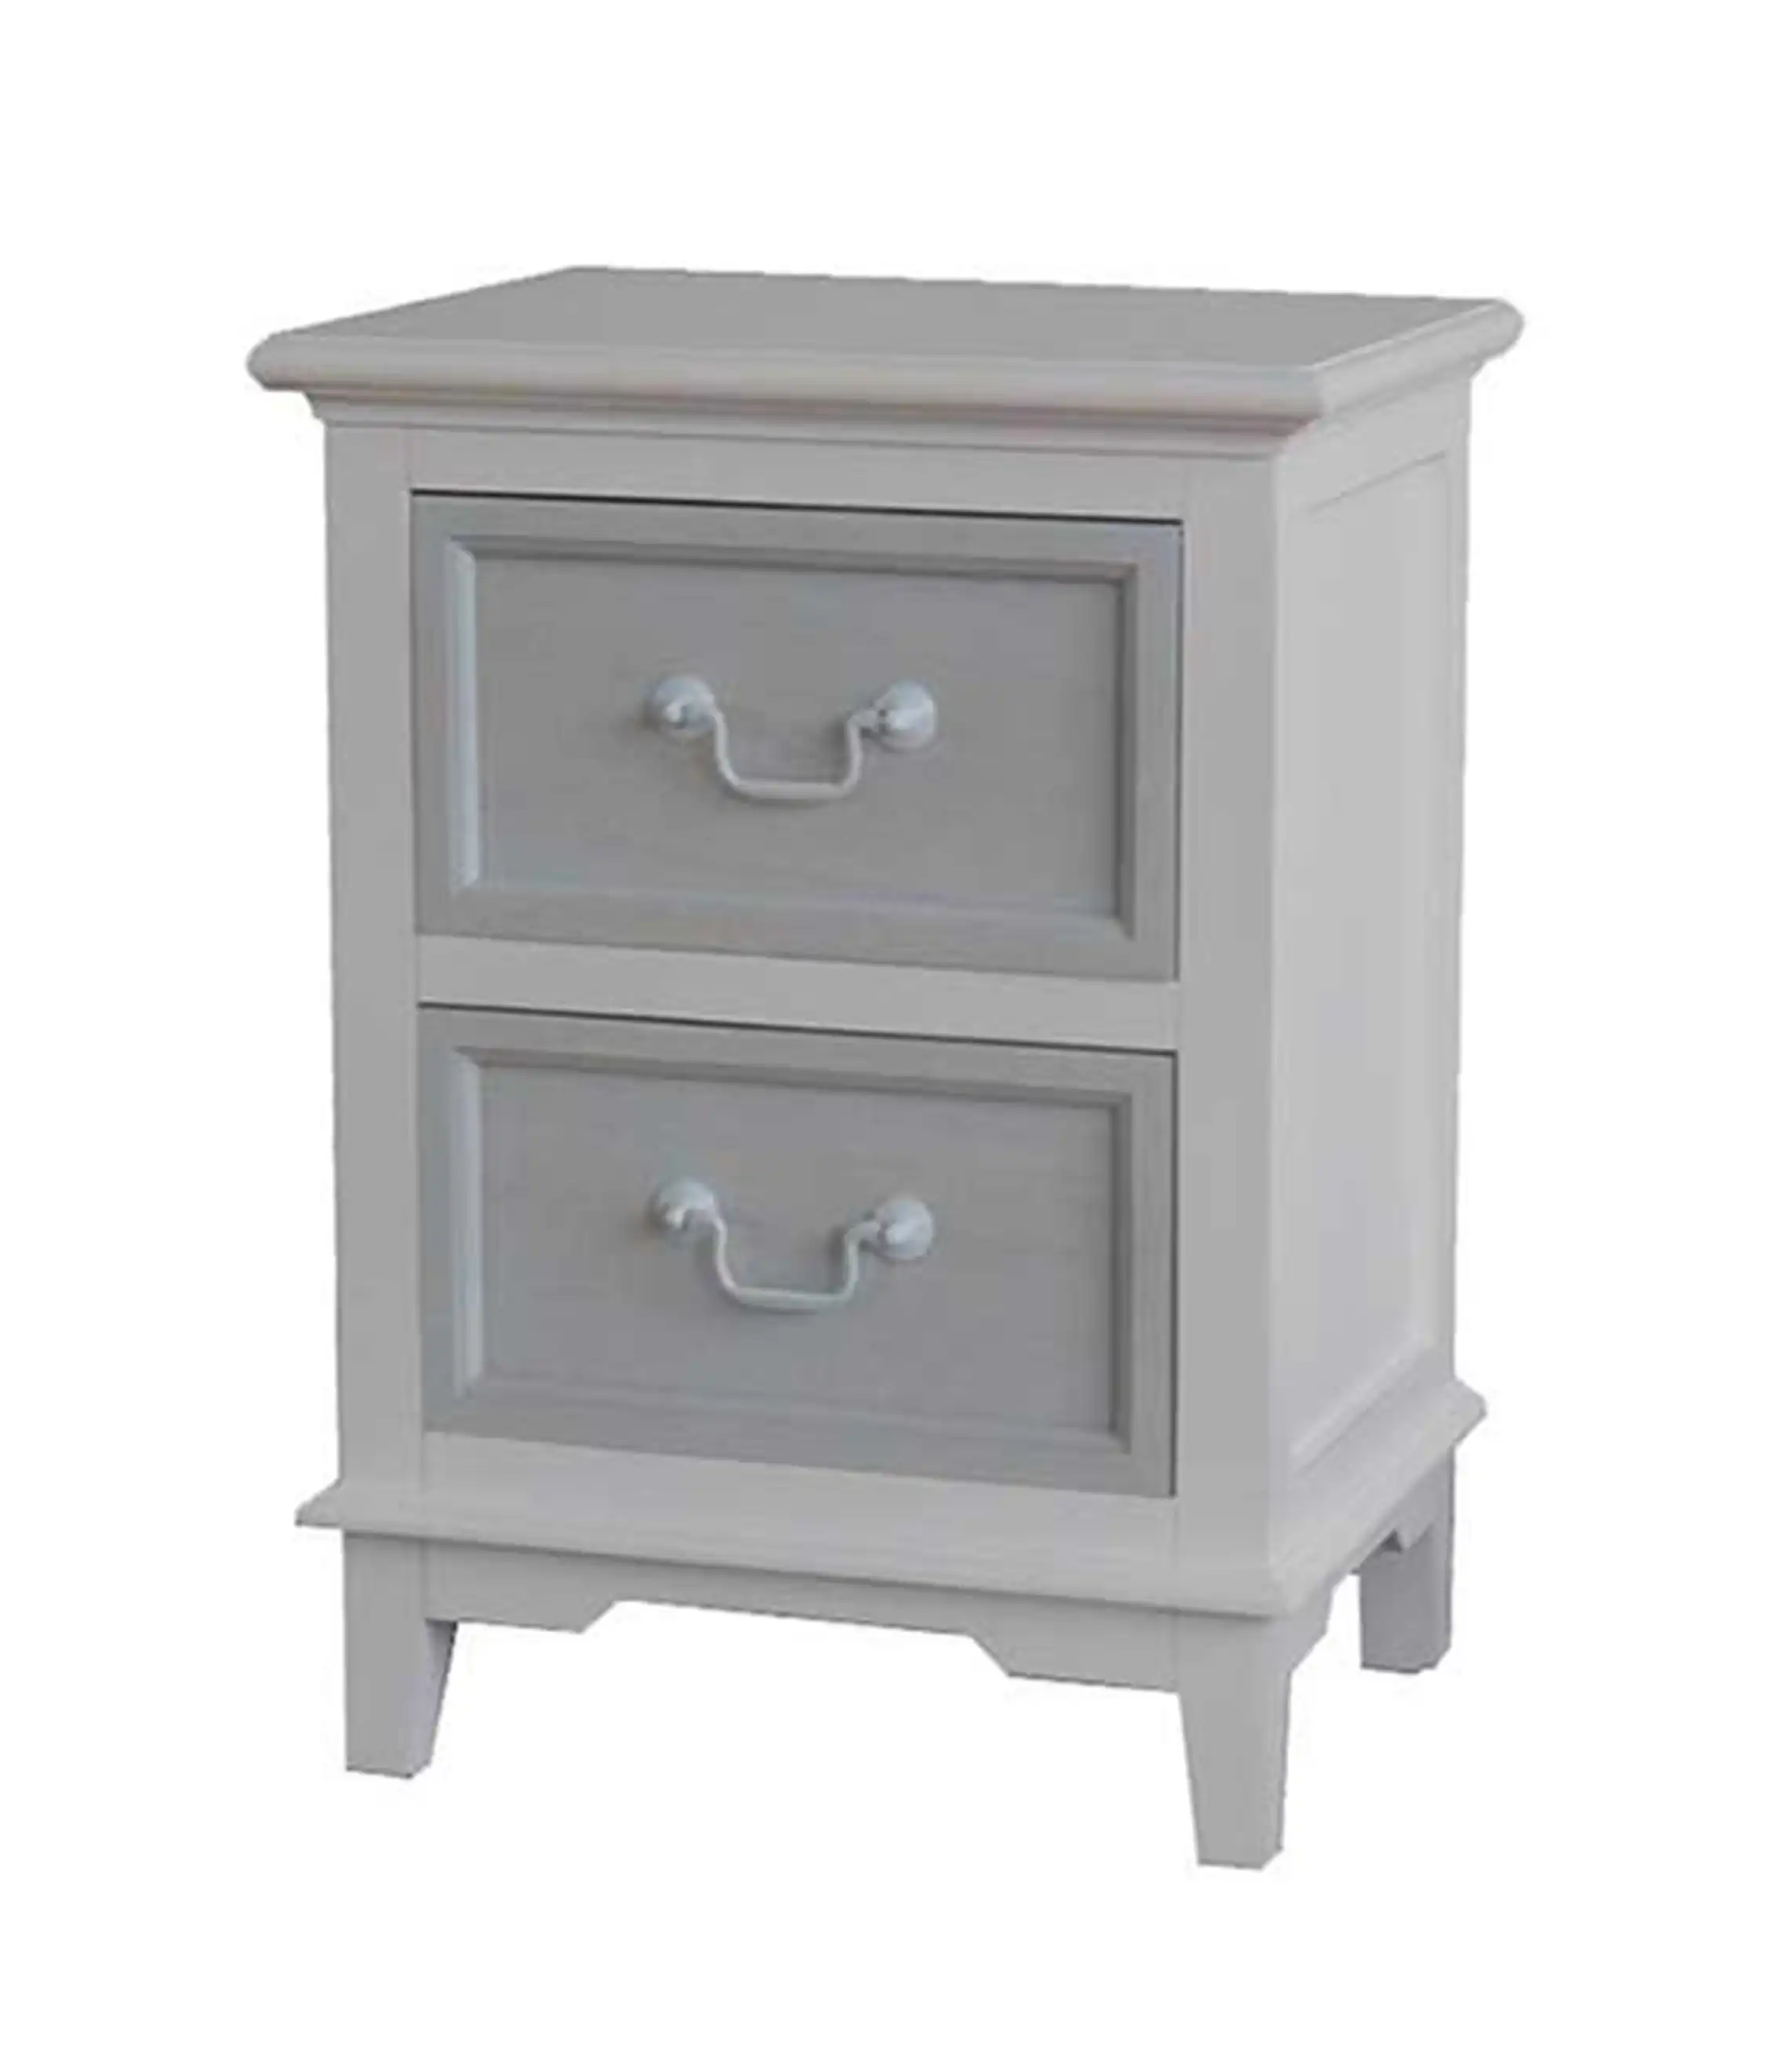 Bedside with 2 drawers - popular handicrafts